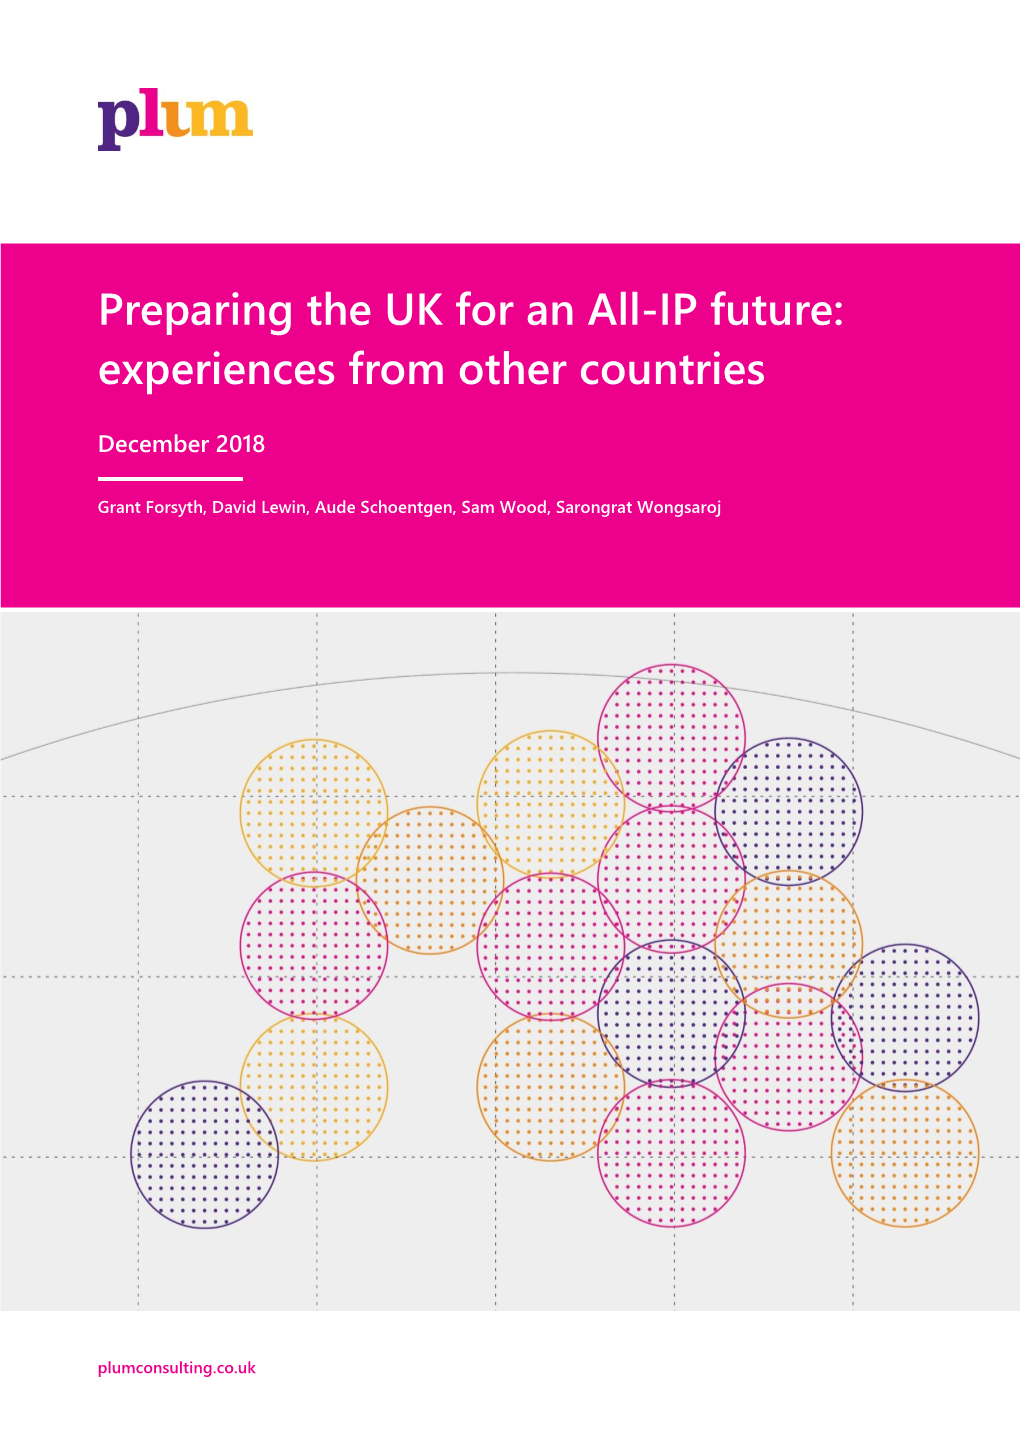 Preparing the UK for an All-IP Future: Experiences from Other Countries